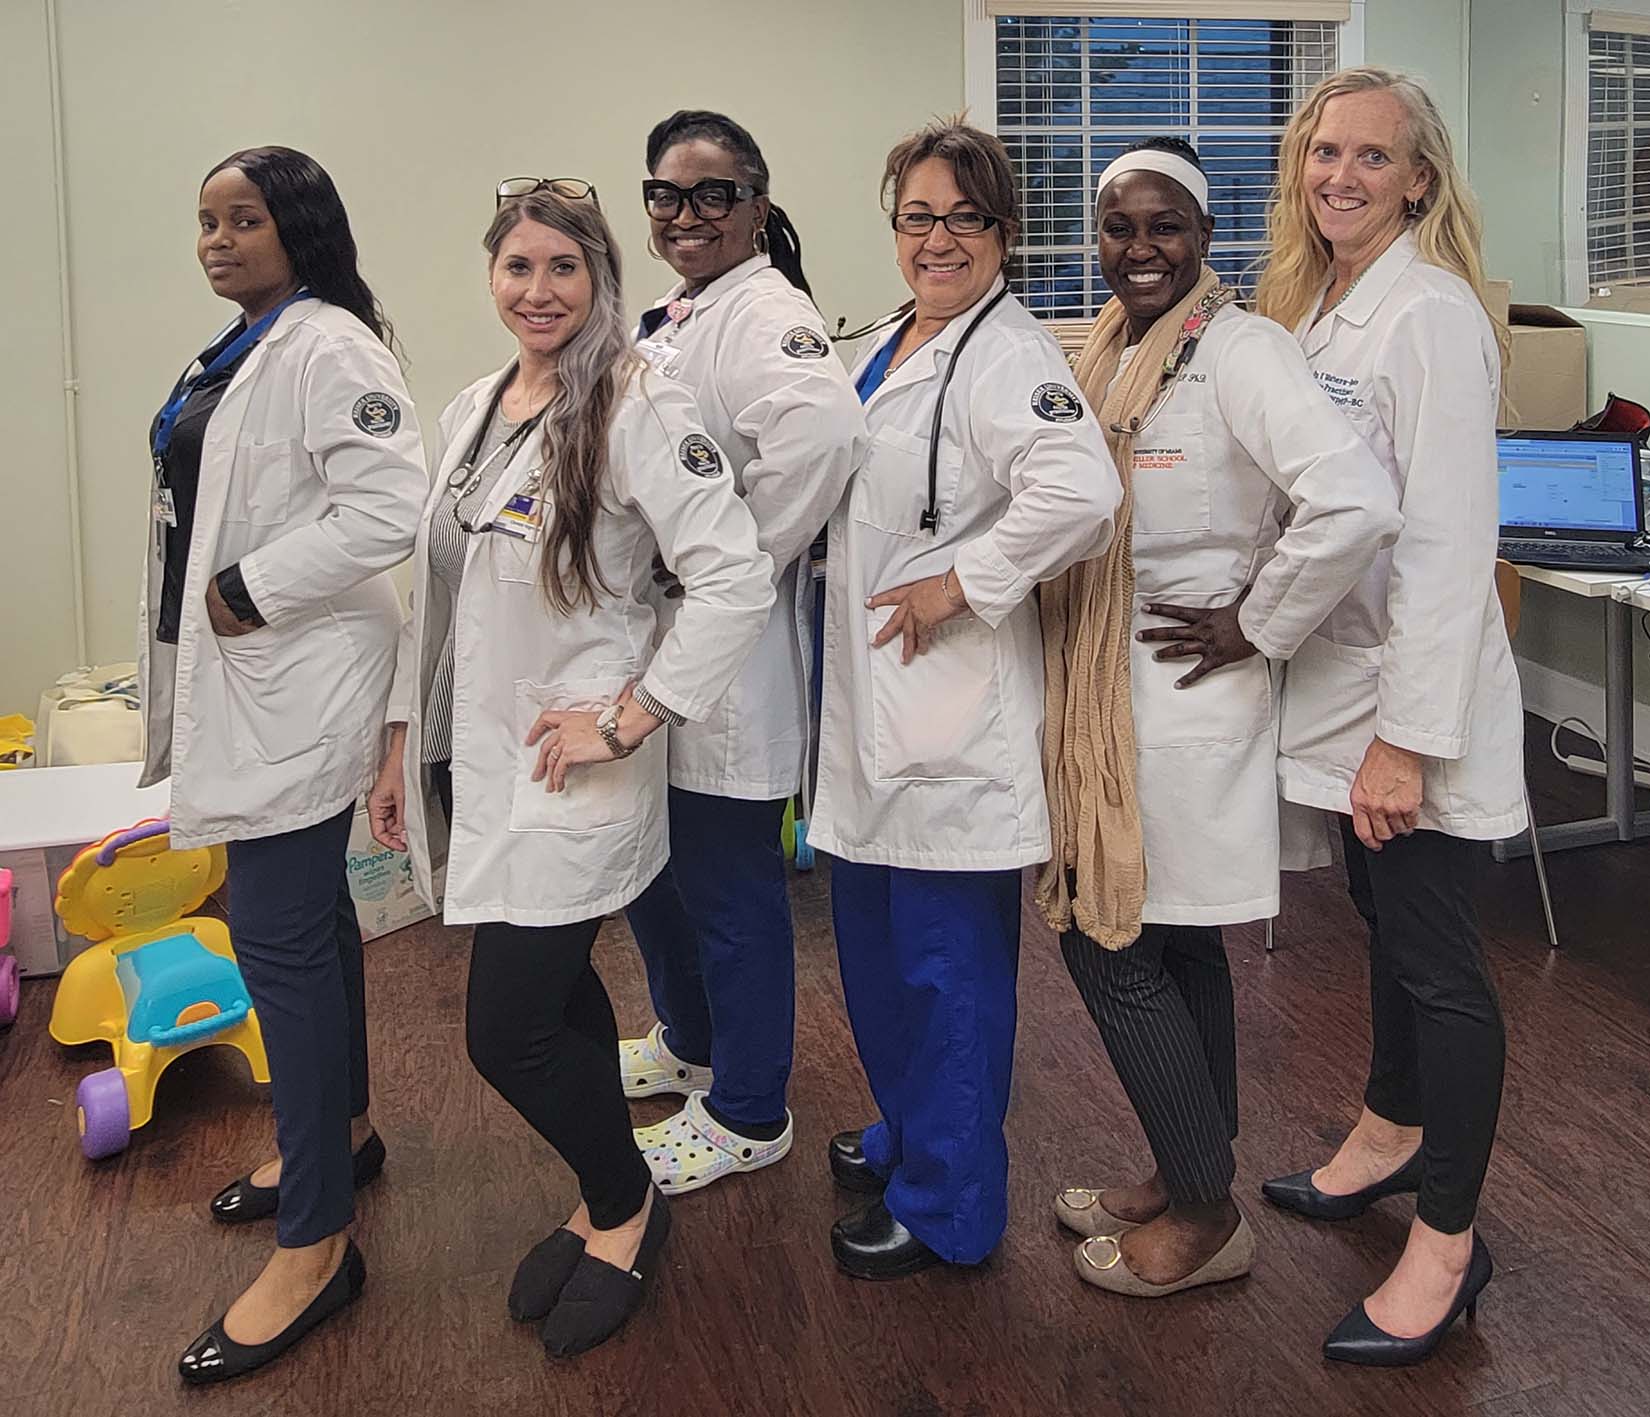 Keiser University Partnership to Offer Women’s Health Clinics Provides Valuable Service and Student Insights